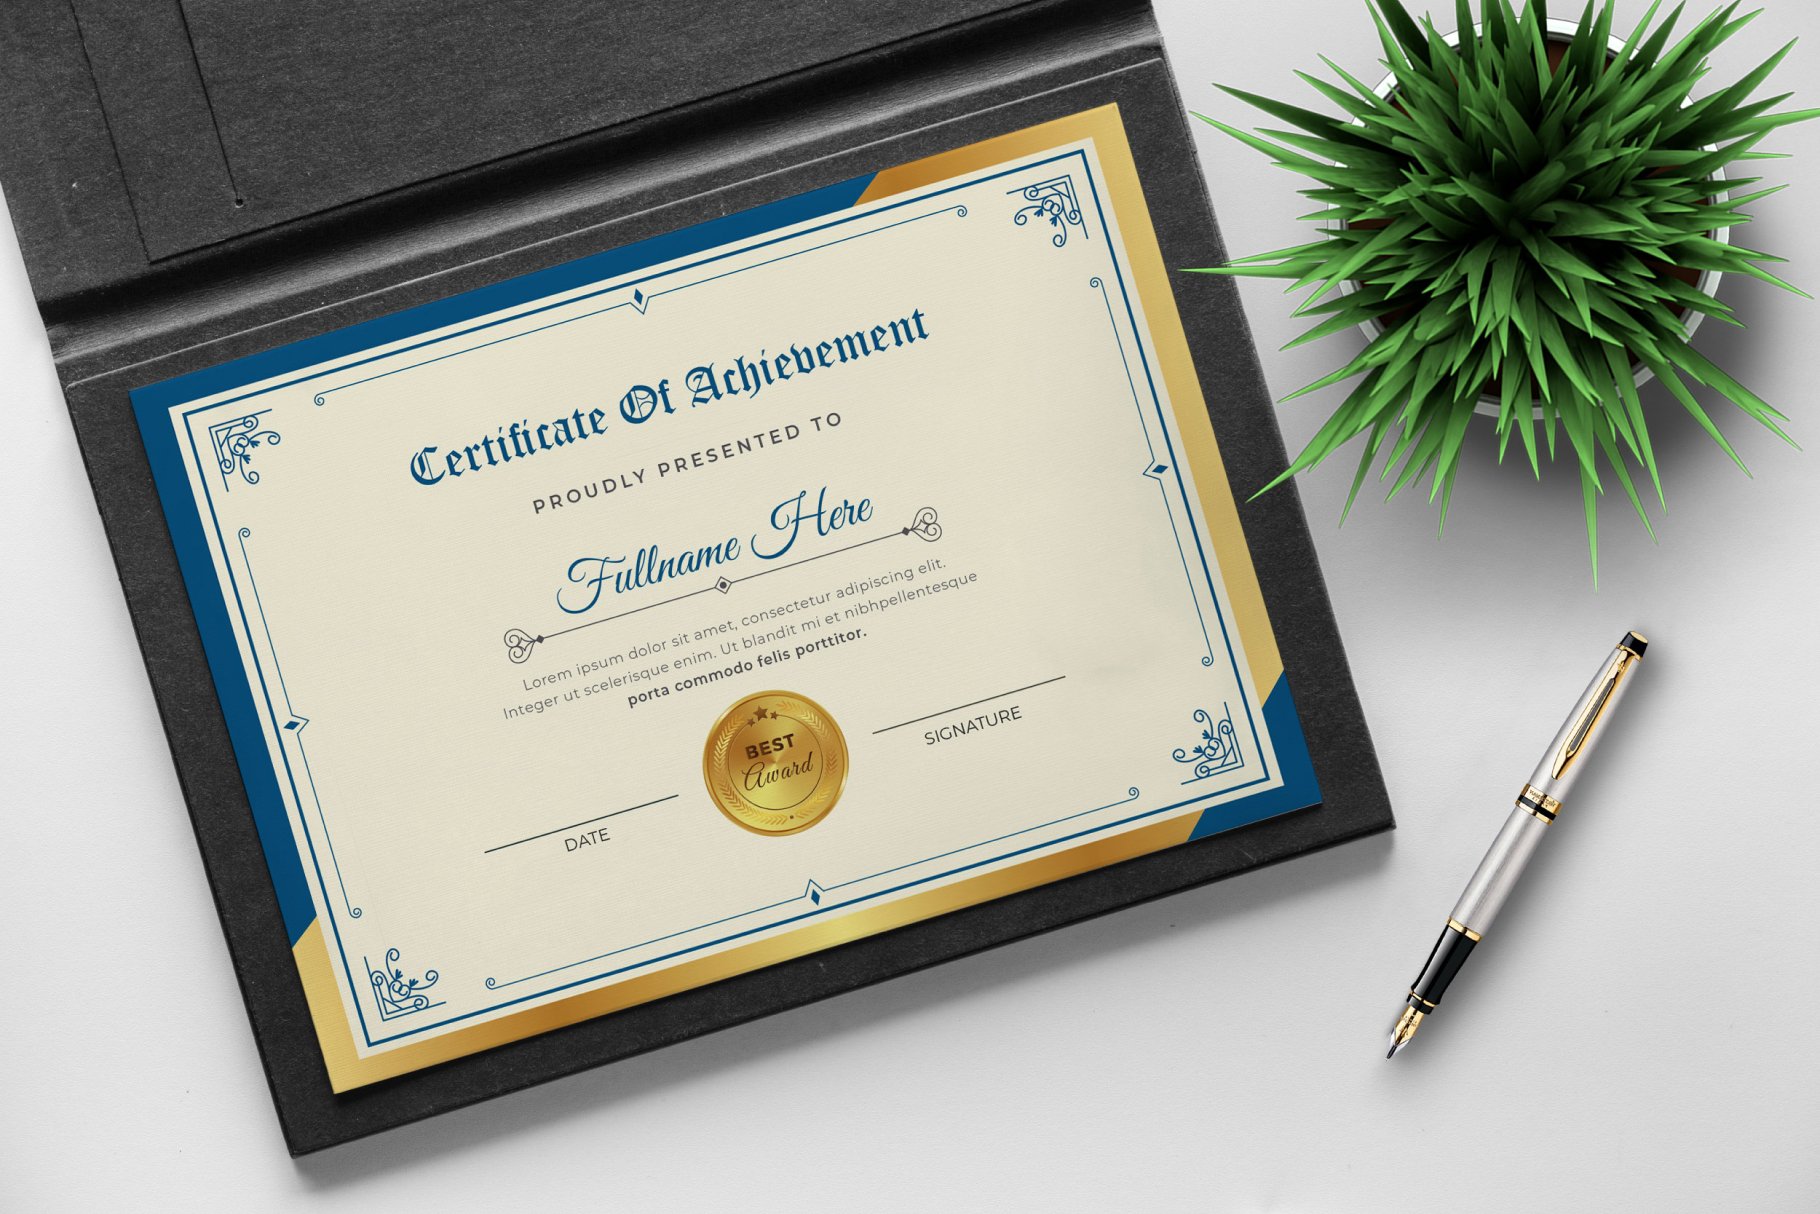 Certificate of Achievement Template cover image.